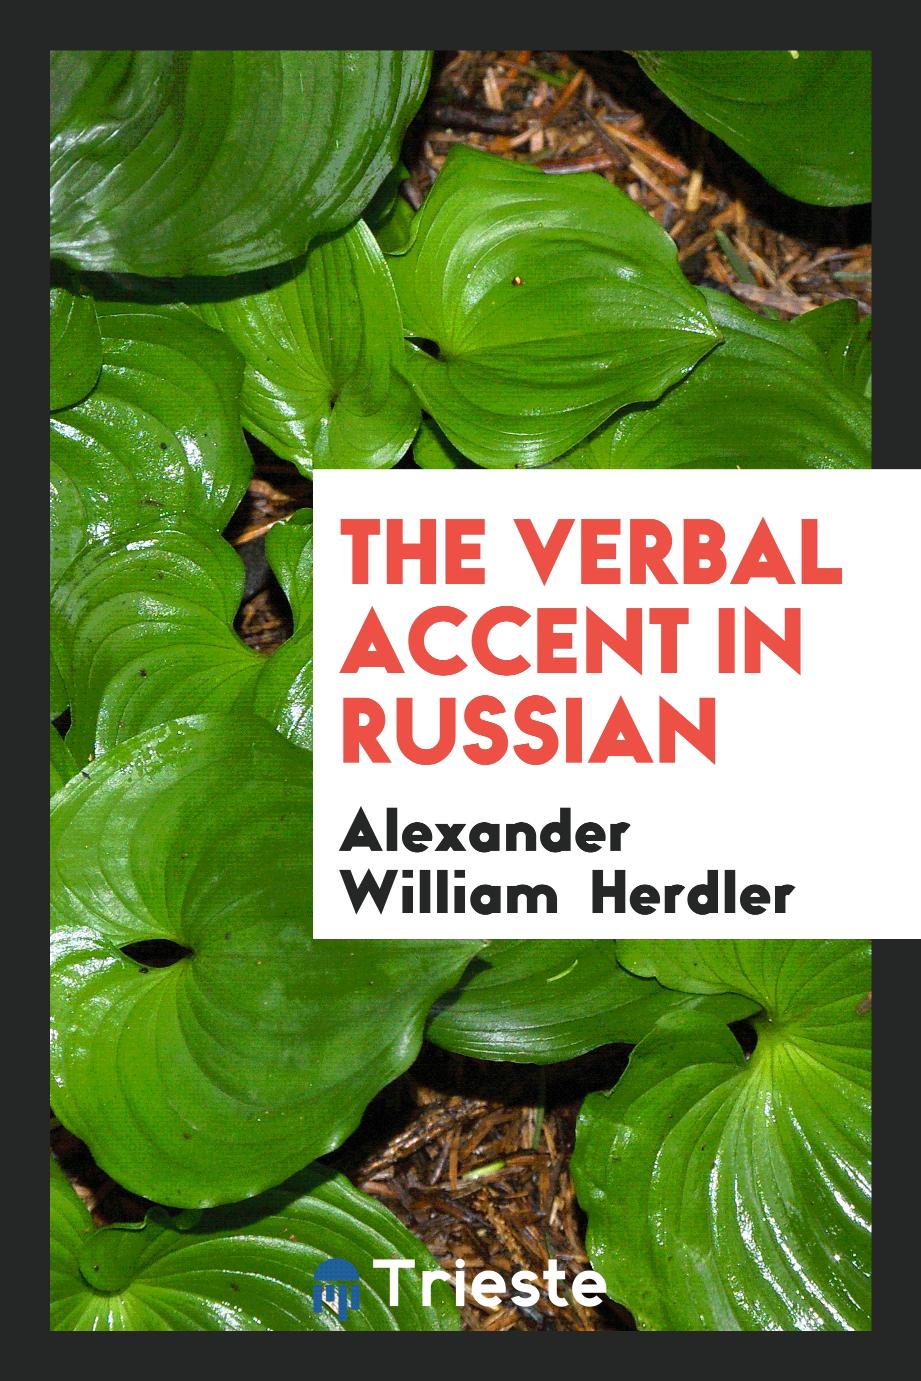 The Verbal Accent in Russian